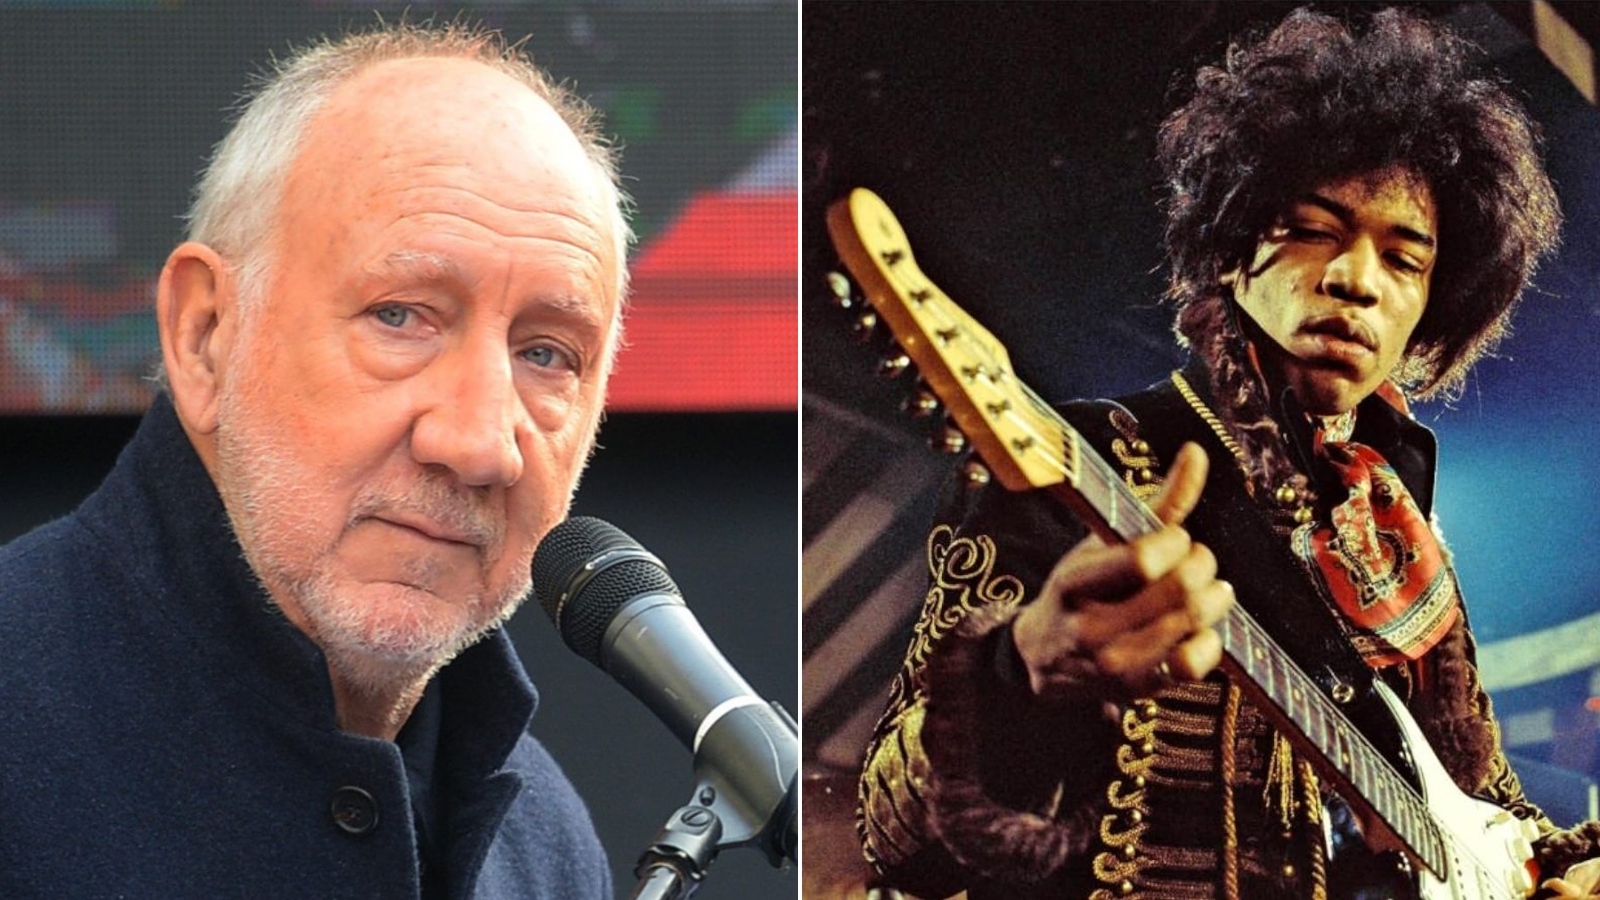 'Jimi Hendrix Was Huge, and He Was Broke': Pete Townshend Speaks on Reality of Making Money in the Music Industry